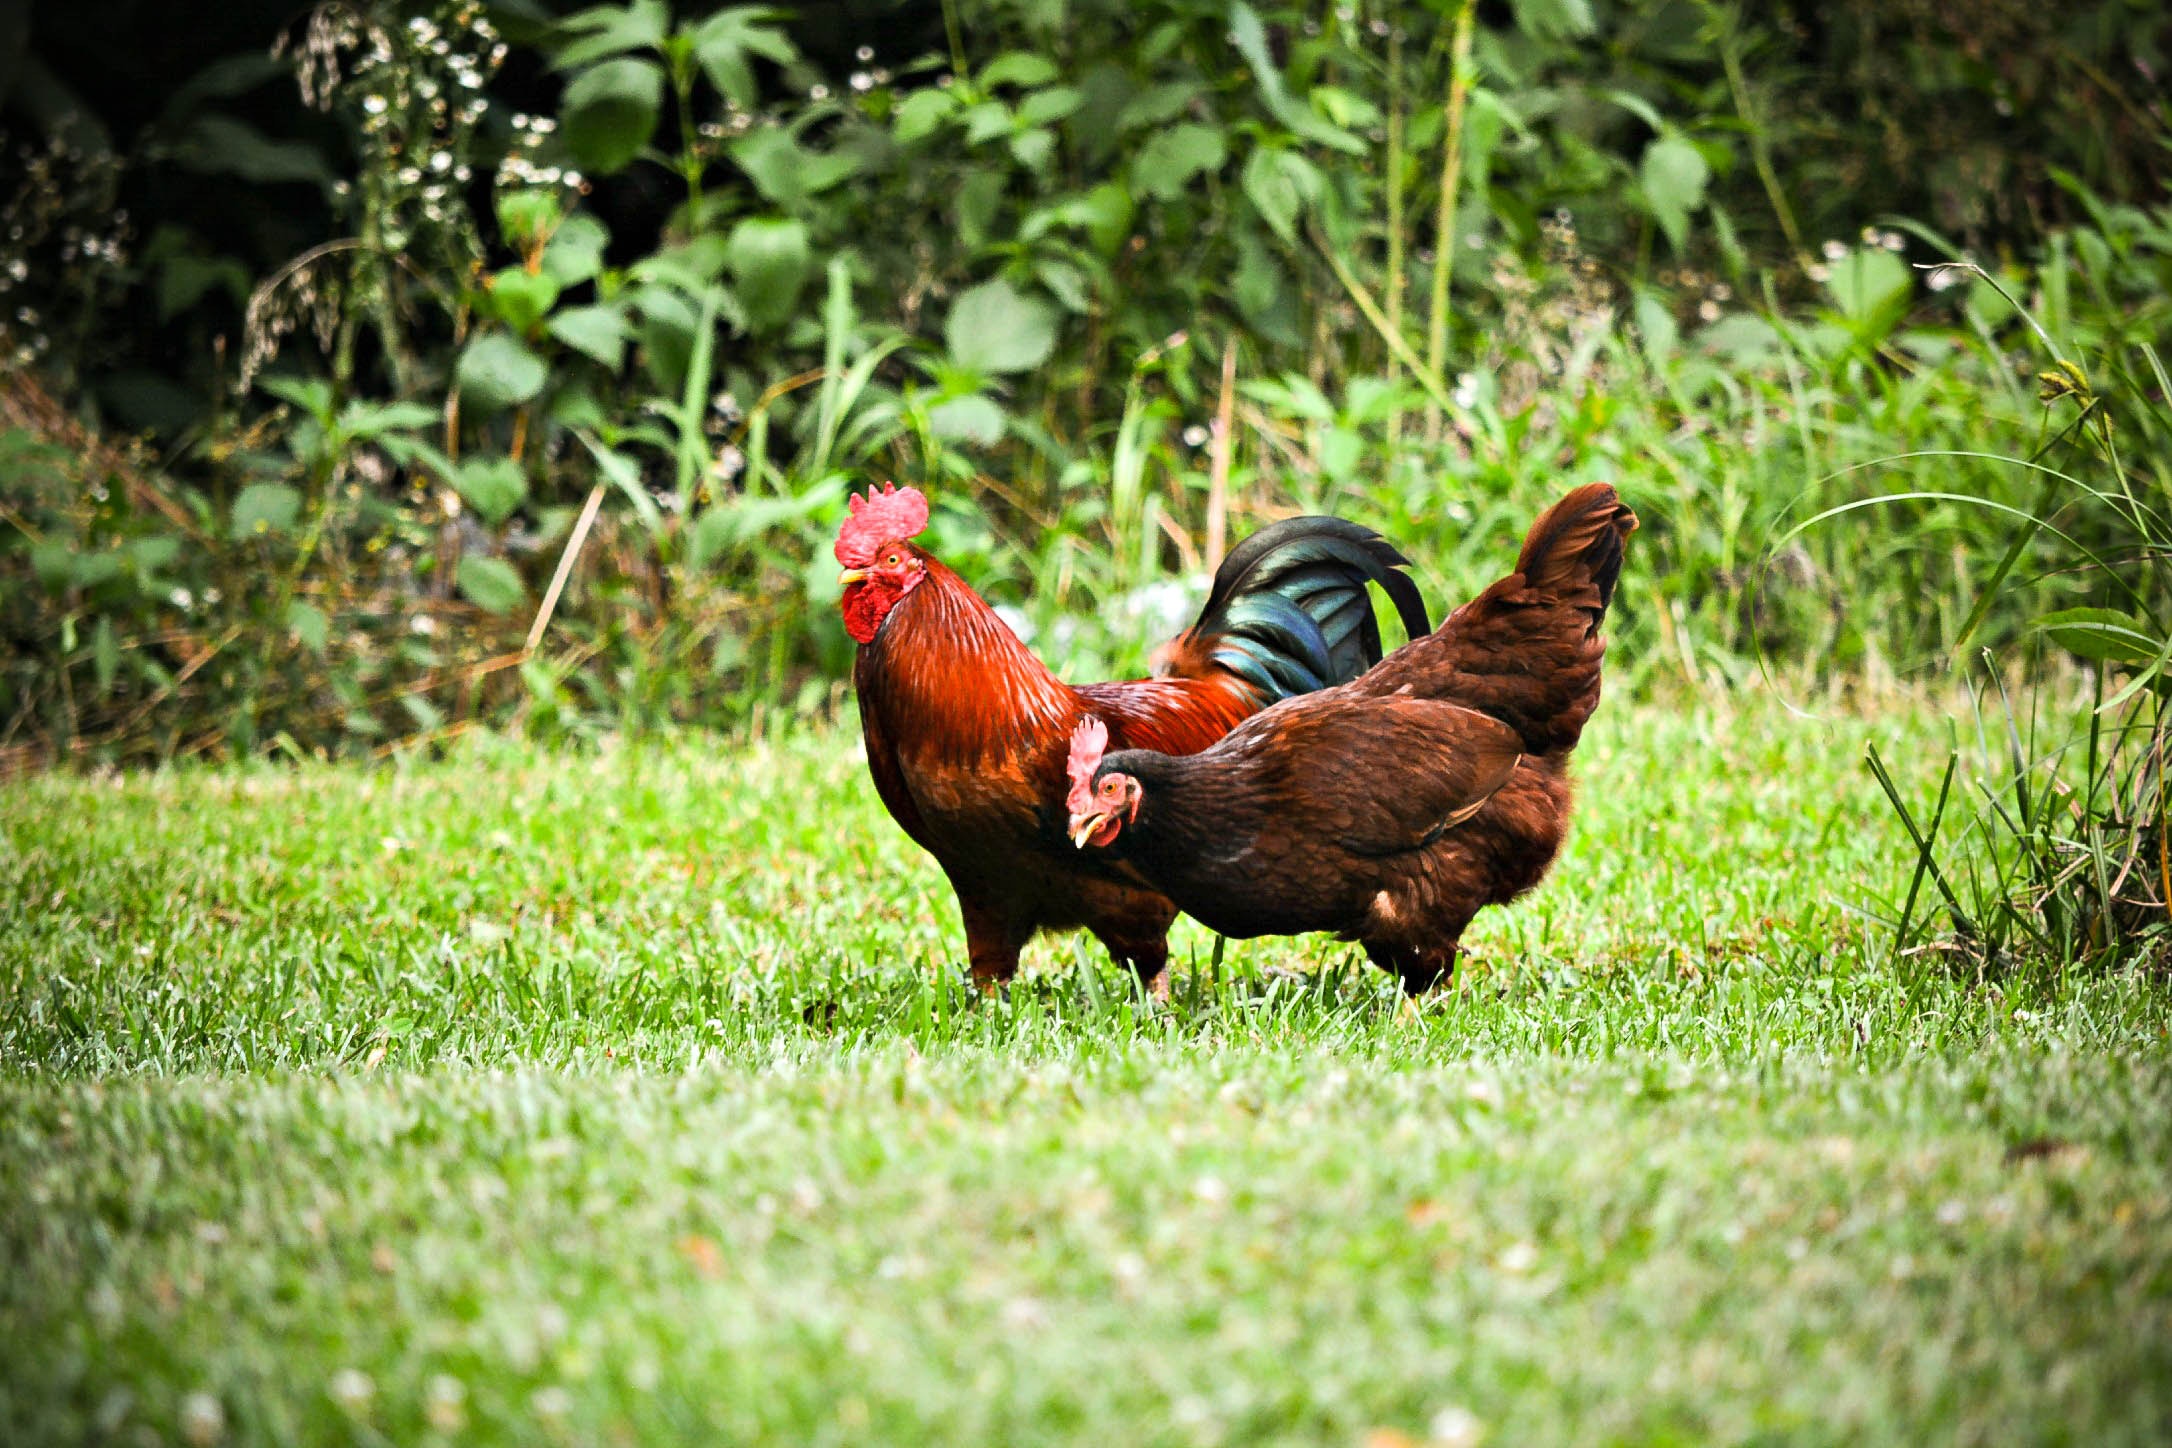 Selecting the Best Chicken Breeds for Your Homestead - Murray McMurray  Hatchery Blog